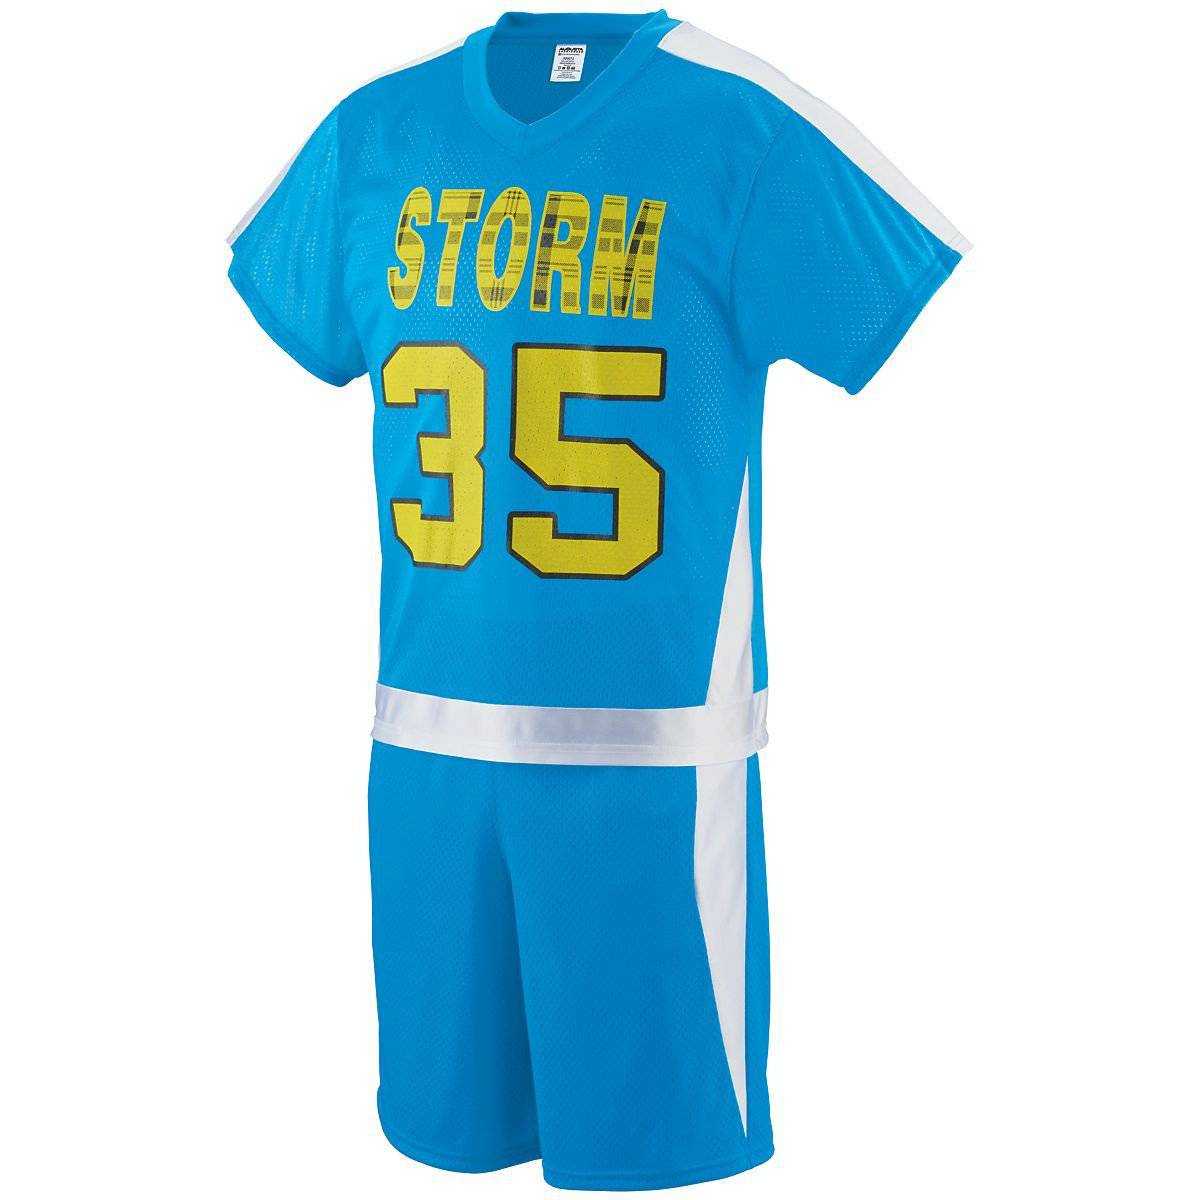 Augusta 9731 Winning Score Jersey Youth - Lime White - HIT a Double